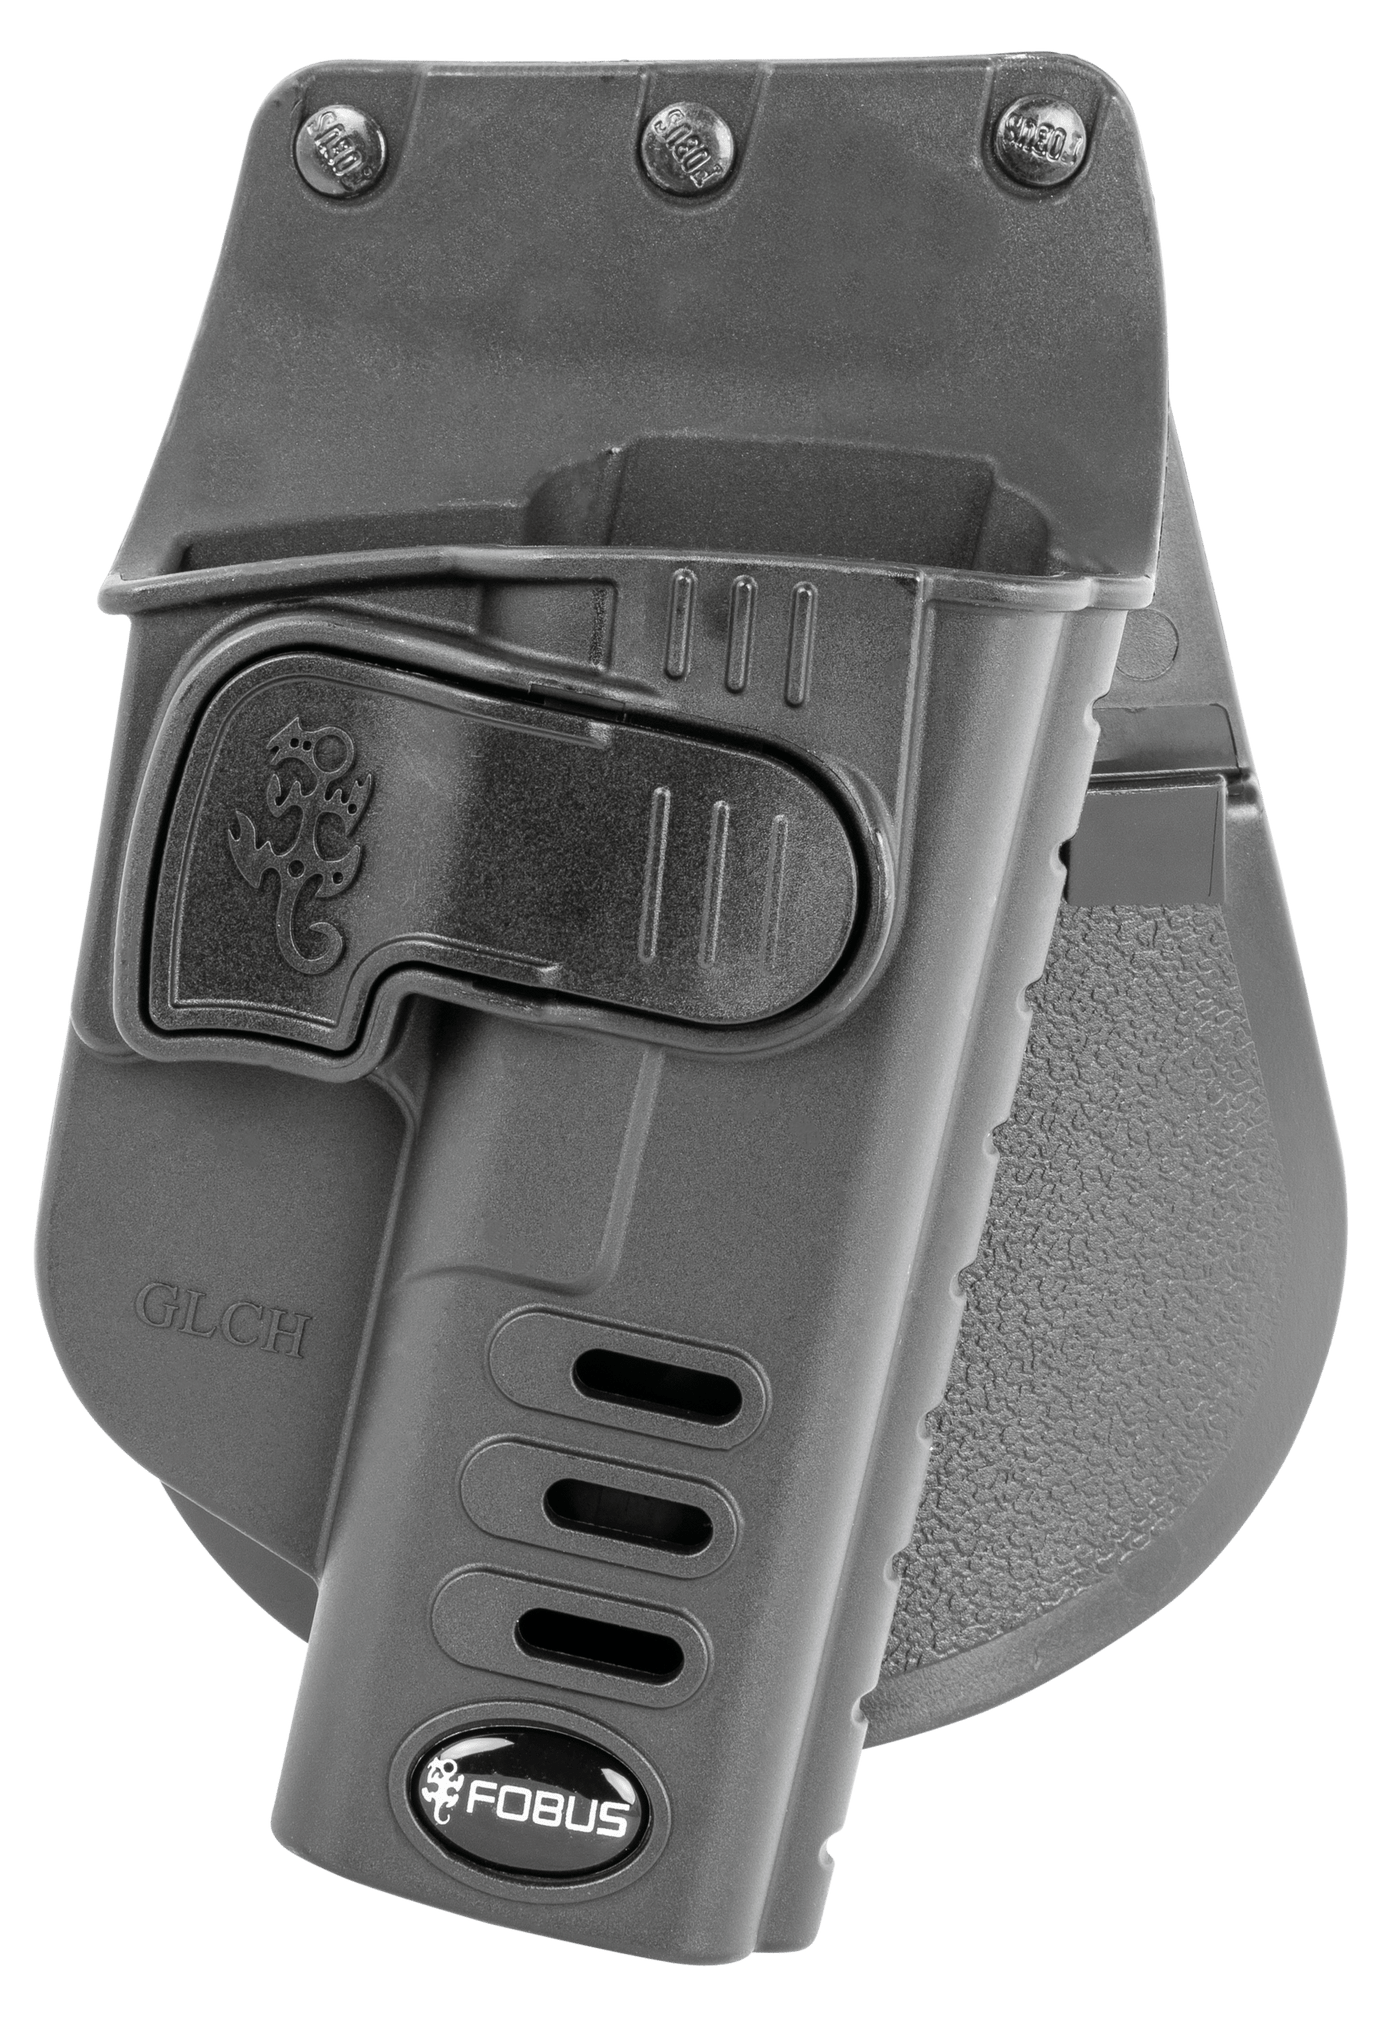 Fobus Fobus Holster Rapid Release - Glock 1719222332 Paddle Holsters And Related Items